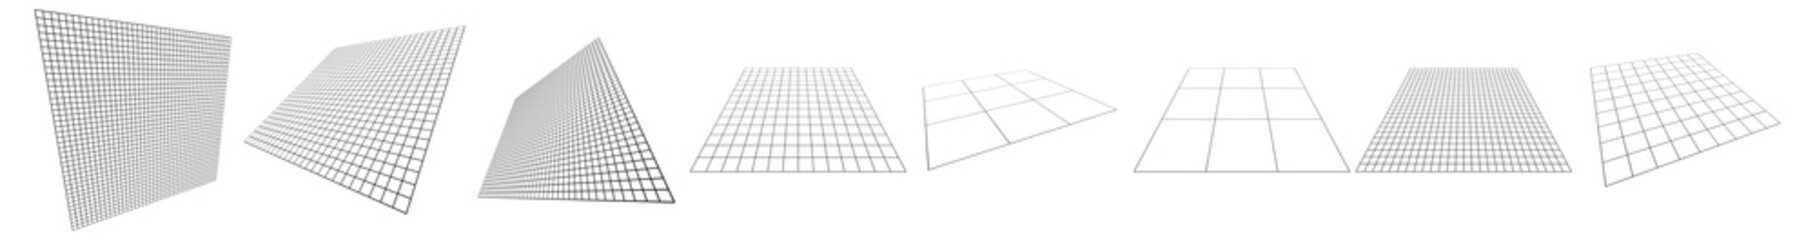 3d angled squared, checkered planes in perspective